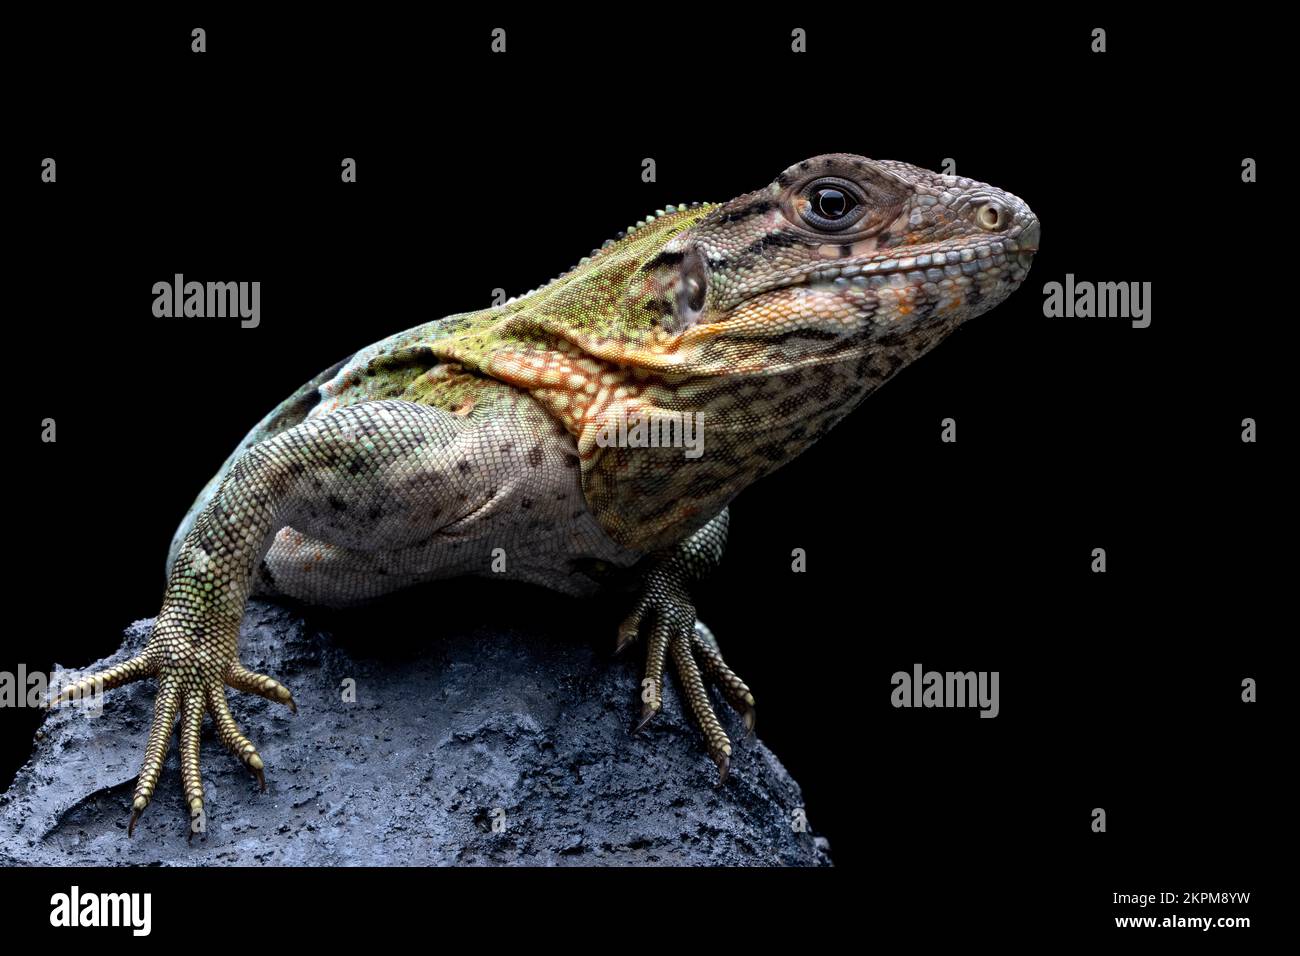 Close-up of a black iguana on a rock, Indonesia Stock Photo